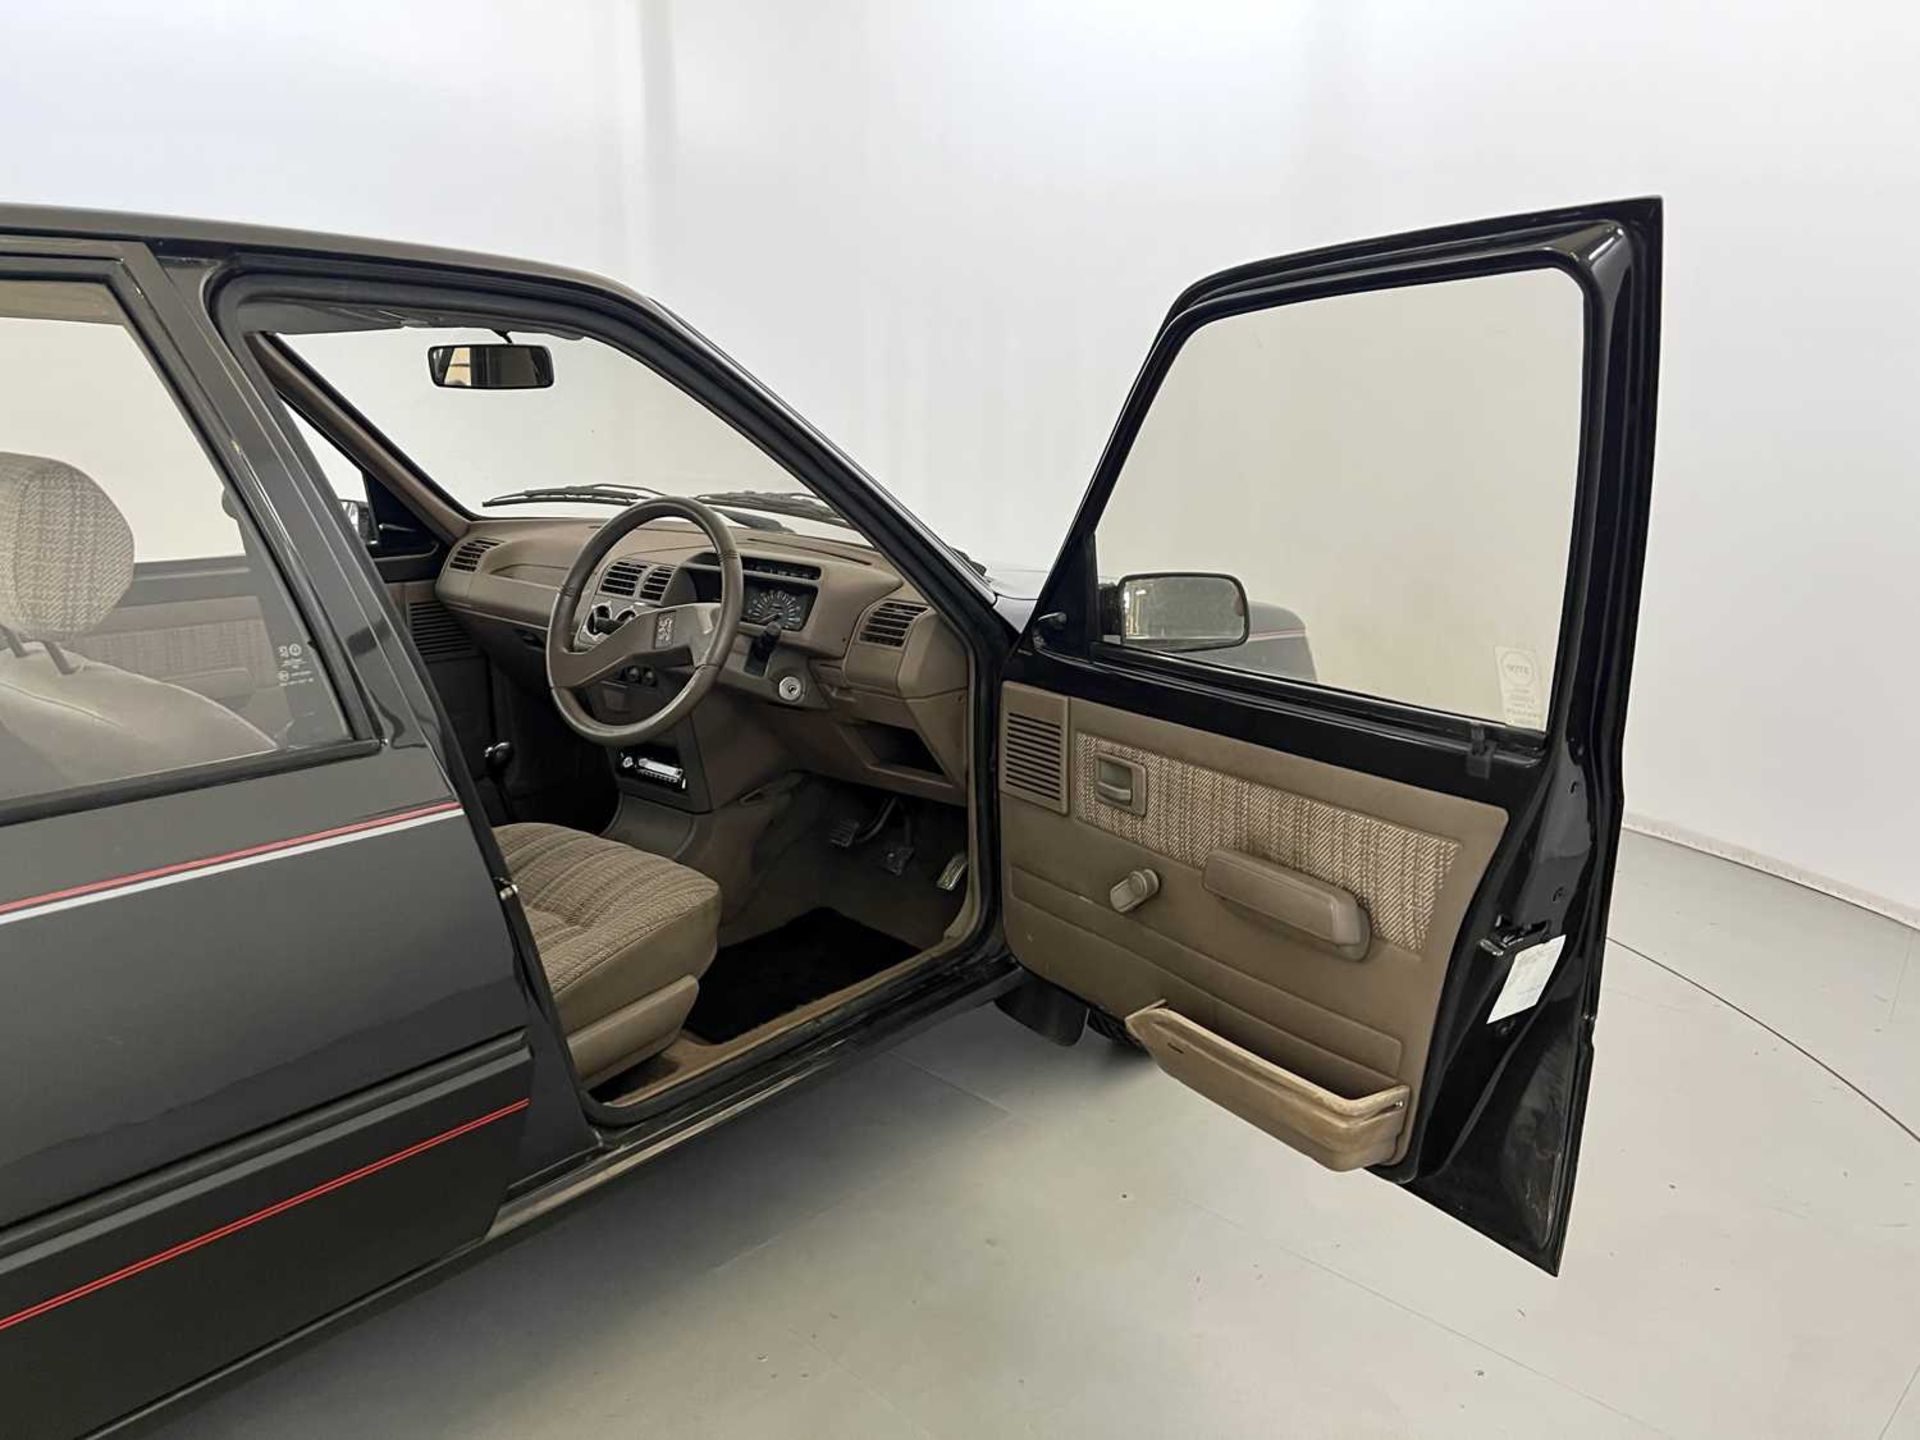 1990 Peugeot 205 GRD - Image 17 of 33